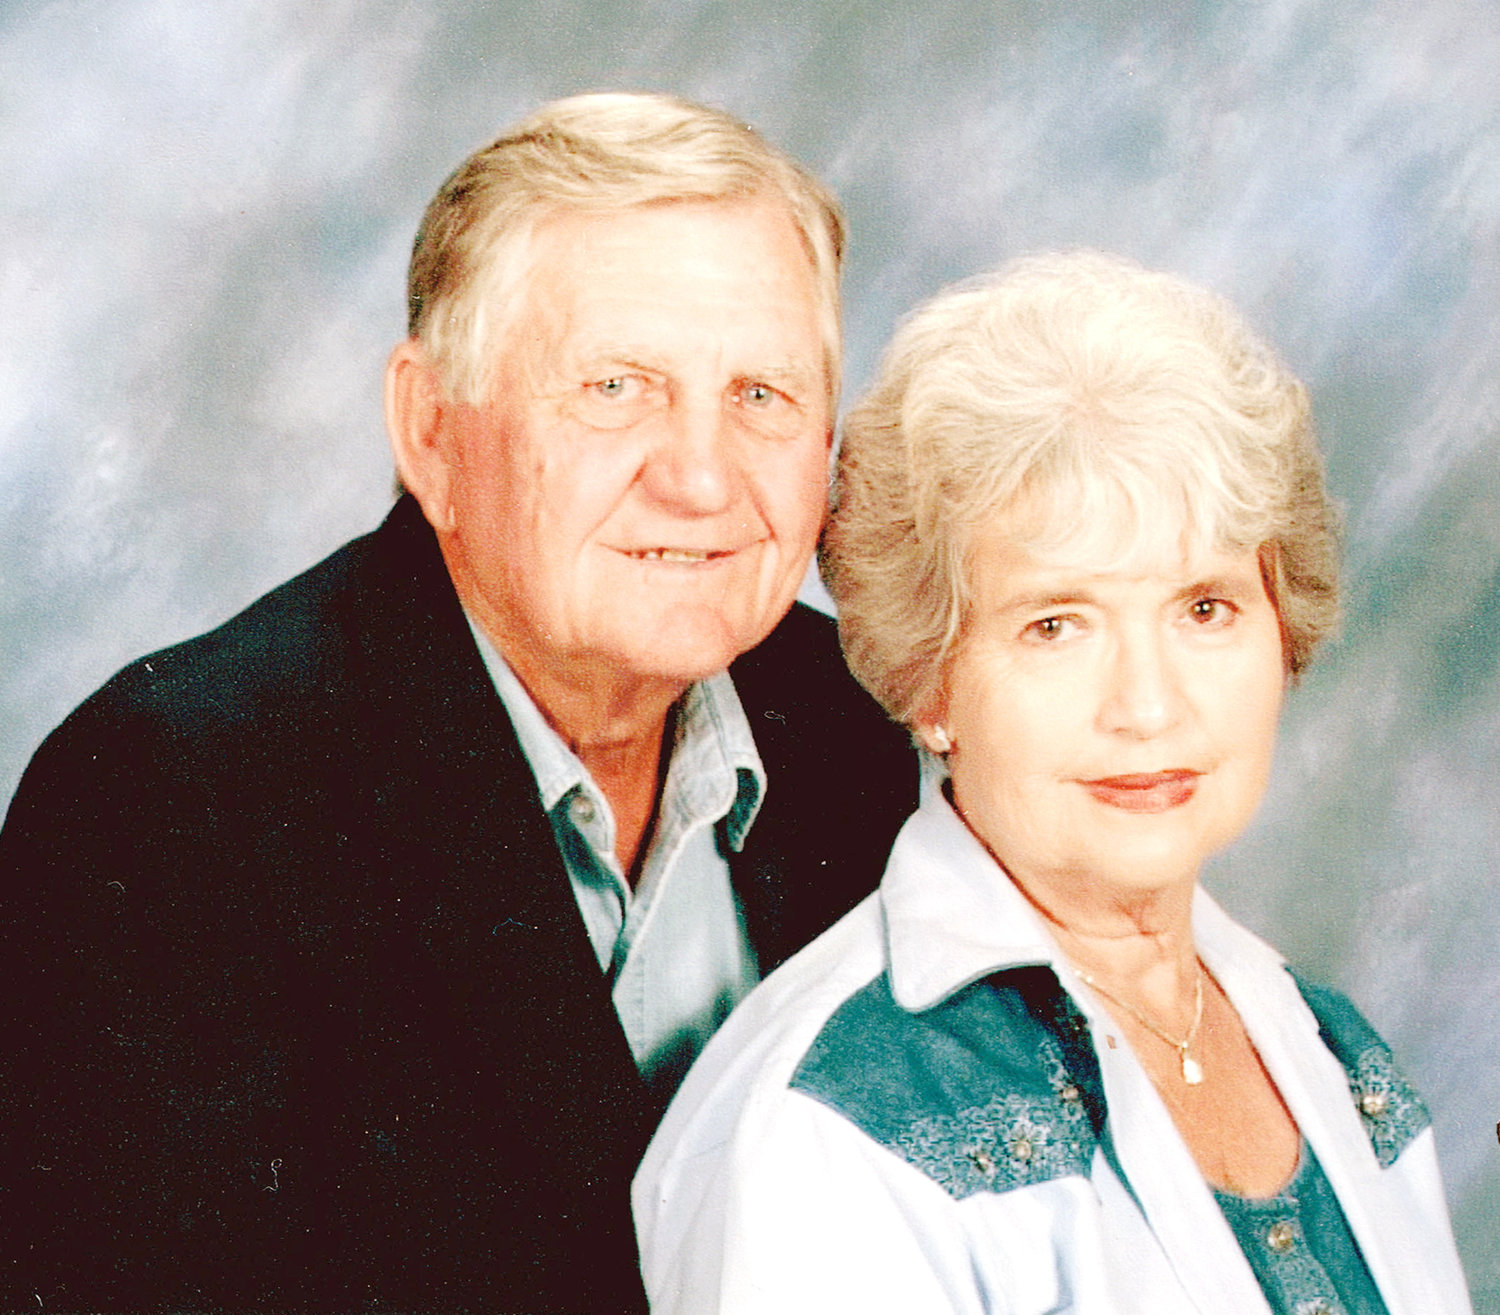 Tom and Pat Bingham of Quitman will observe their 60th wedding anniversary on Thursday, April 27. A celebration is being hosted by their children at their son’s home in Troup from 2-5 p.m. Tom, 81, and Pat, 77, were married April 27, 1957 in Tyler. They have two children: Dirk and wife Marcy Bingham, and daughter Lisa Brockelman. Grandchildren are Trevor and Lexie Fuller and Jarod and Jacob Bingham. Tom graduated from Kilgore High School in 1953 and Kilgore College in 1955 and is retired from Shell Oil Company. Pat graduated from Kilgore High School in 1957 and is retired from Quitman Independent School District.